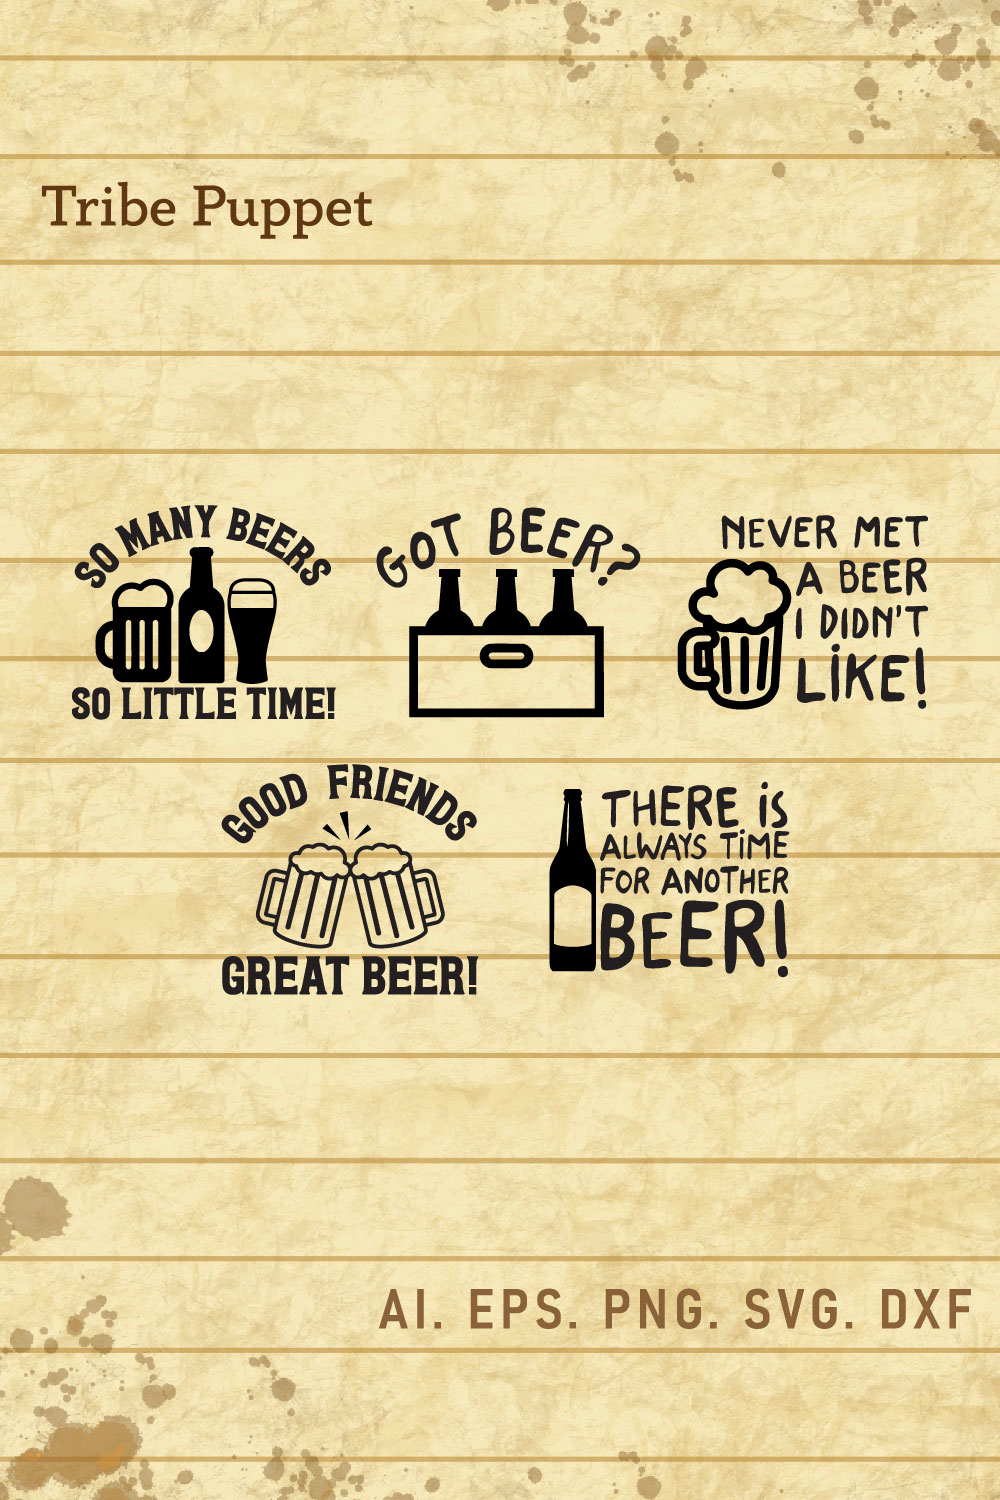 Beer quotes pinterest preview image.